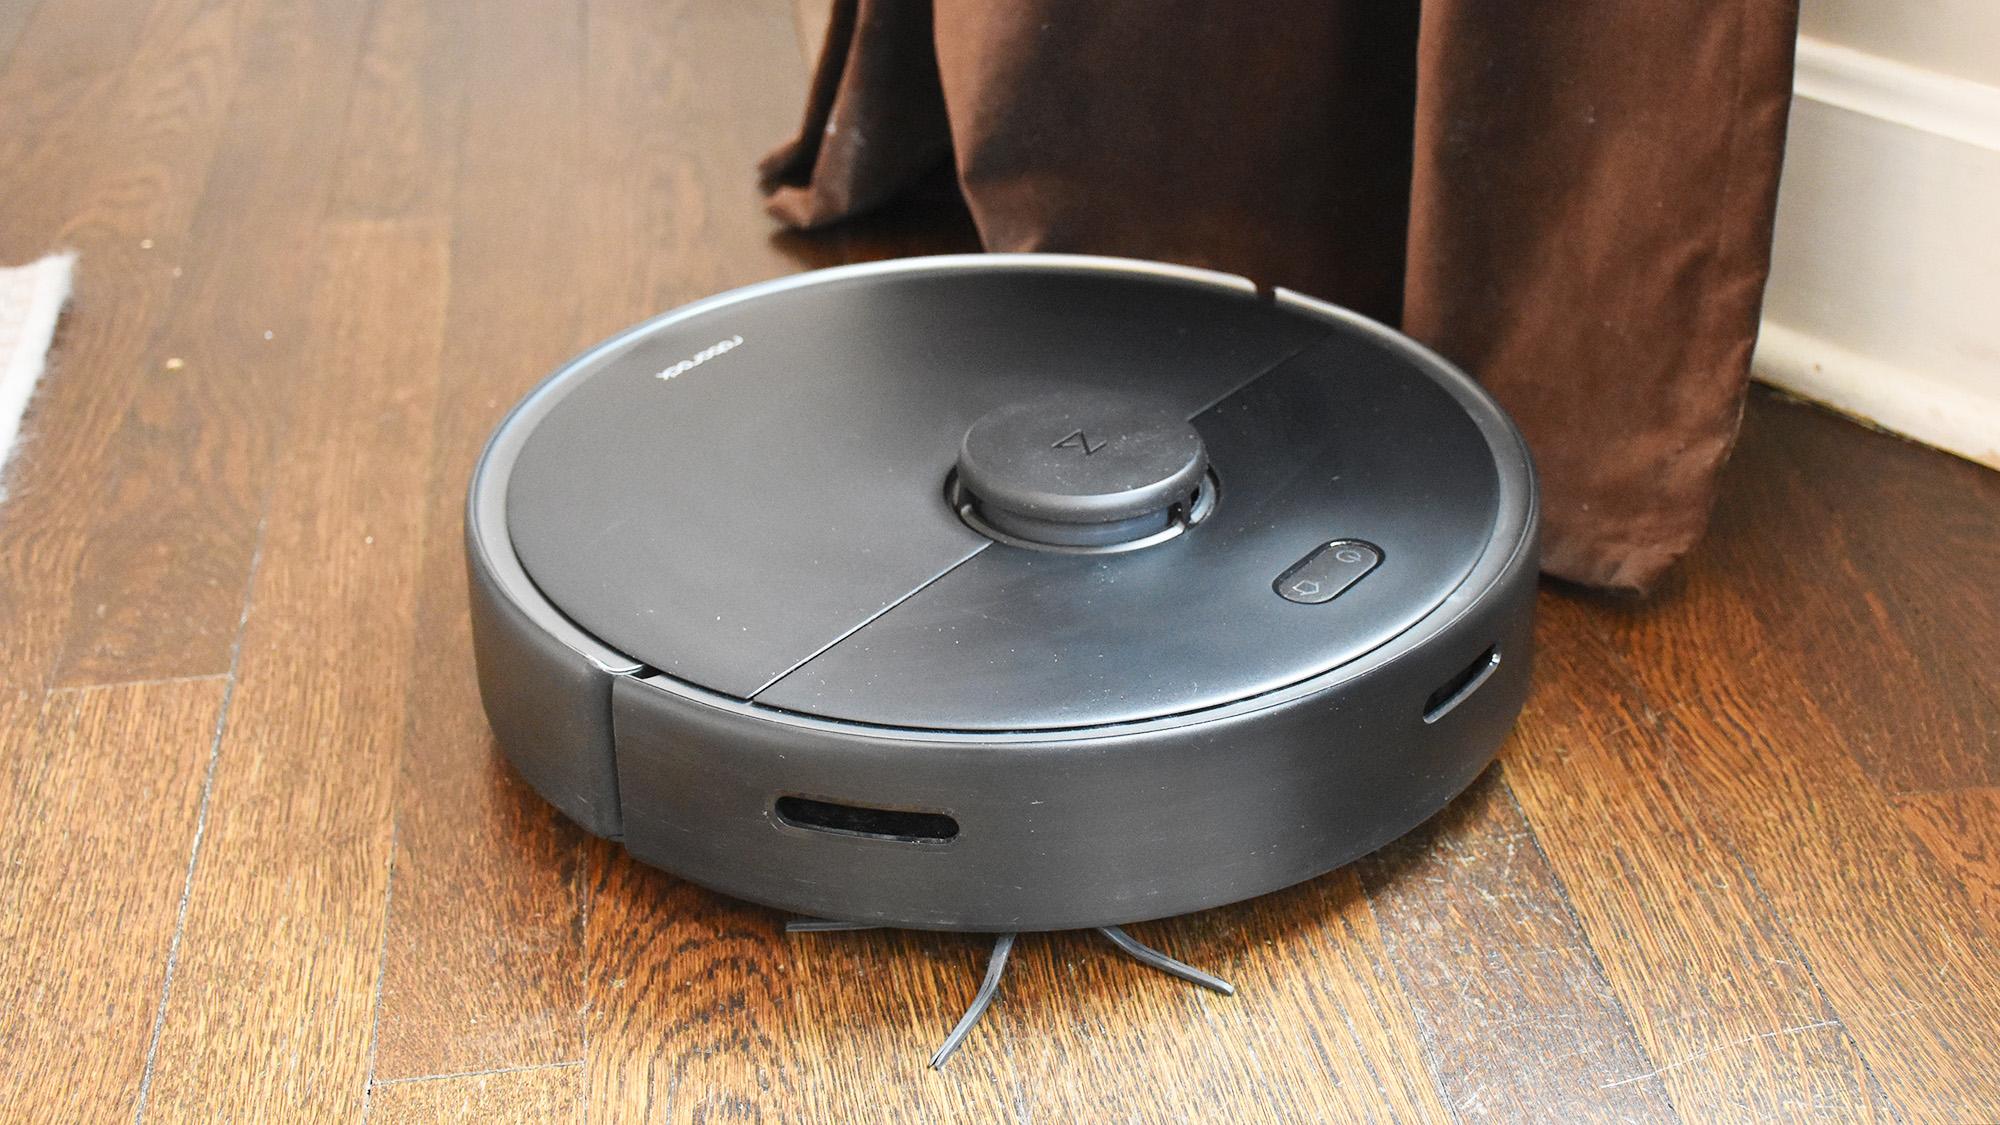 Selvforkælelse Sada tåbelig Are robot vacuums worth it? Here's what you need to know | Tom's Guide